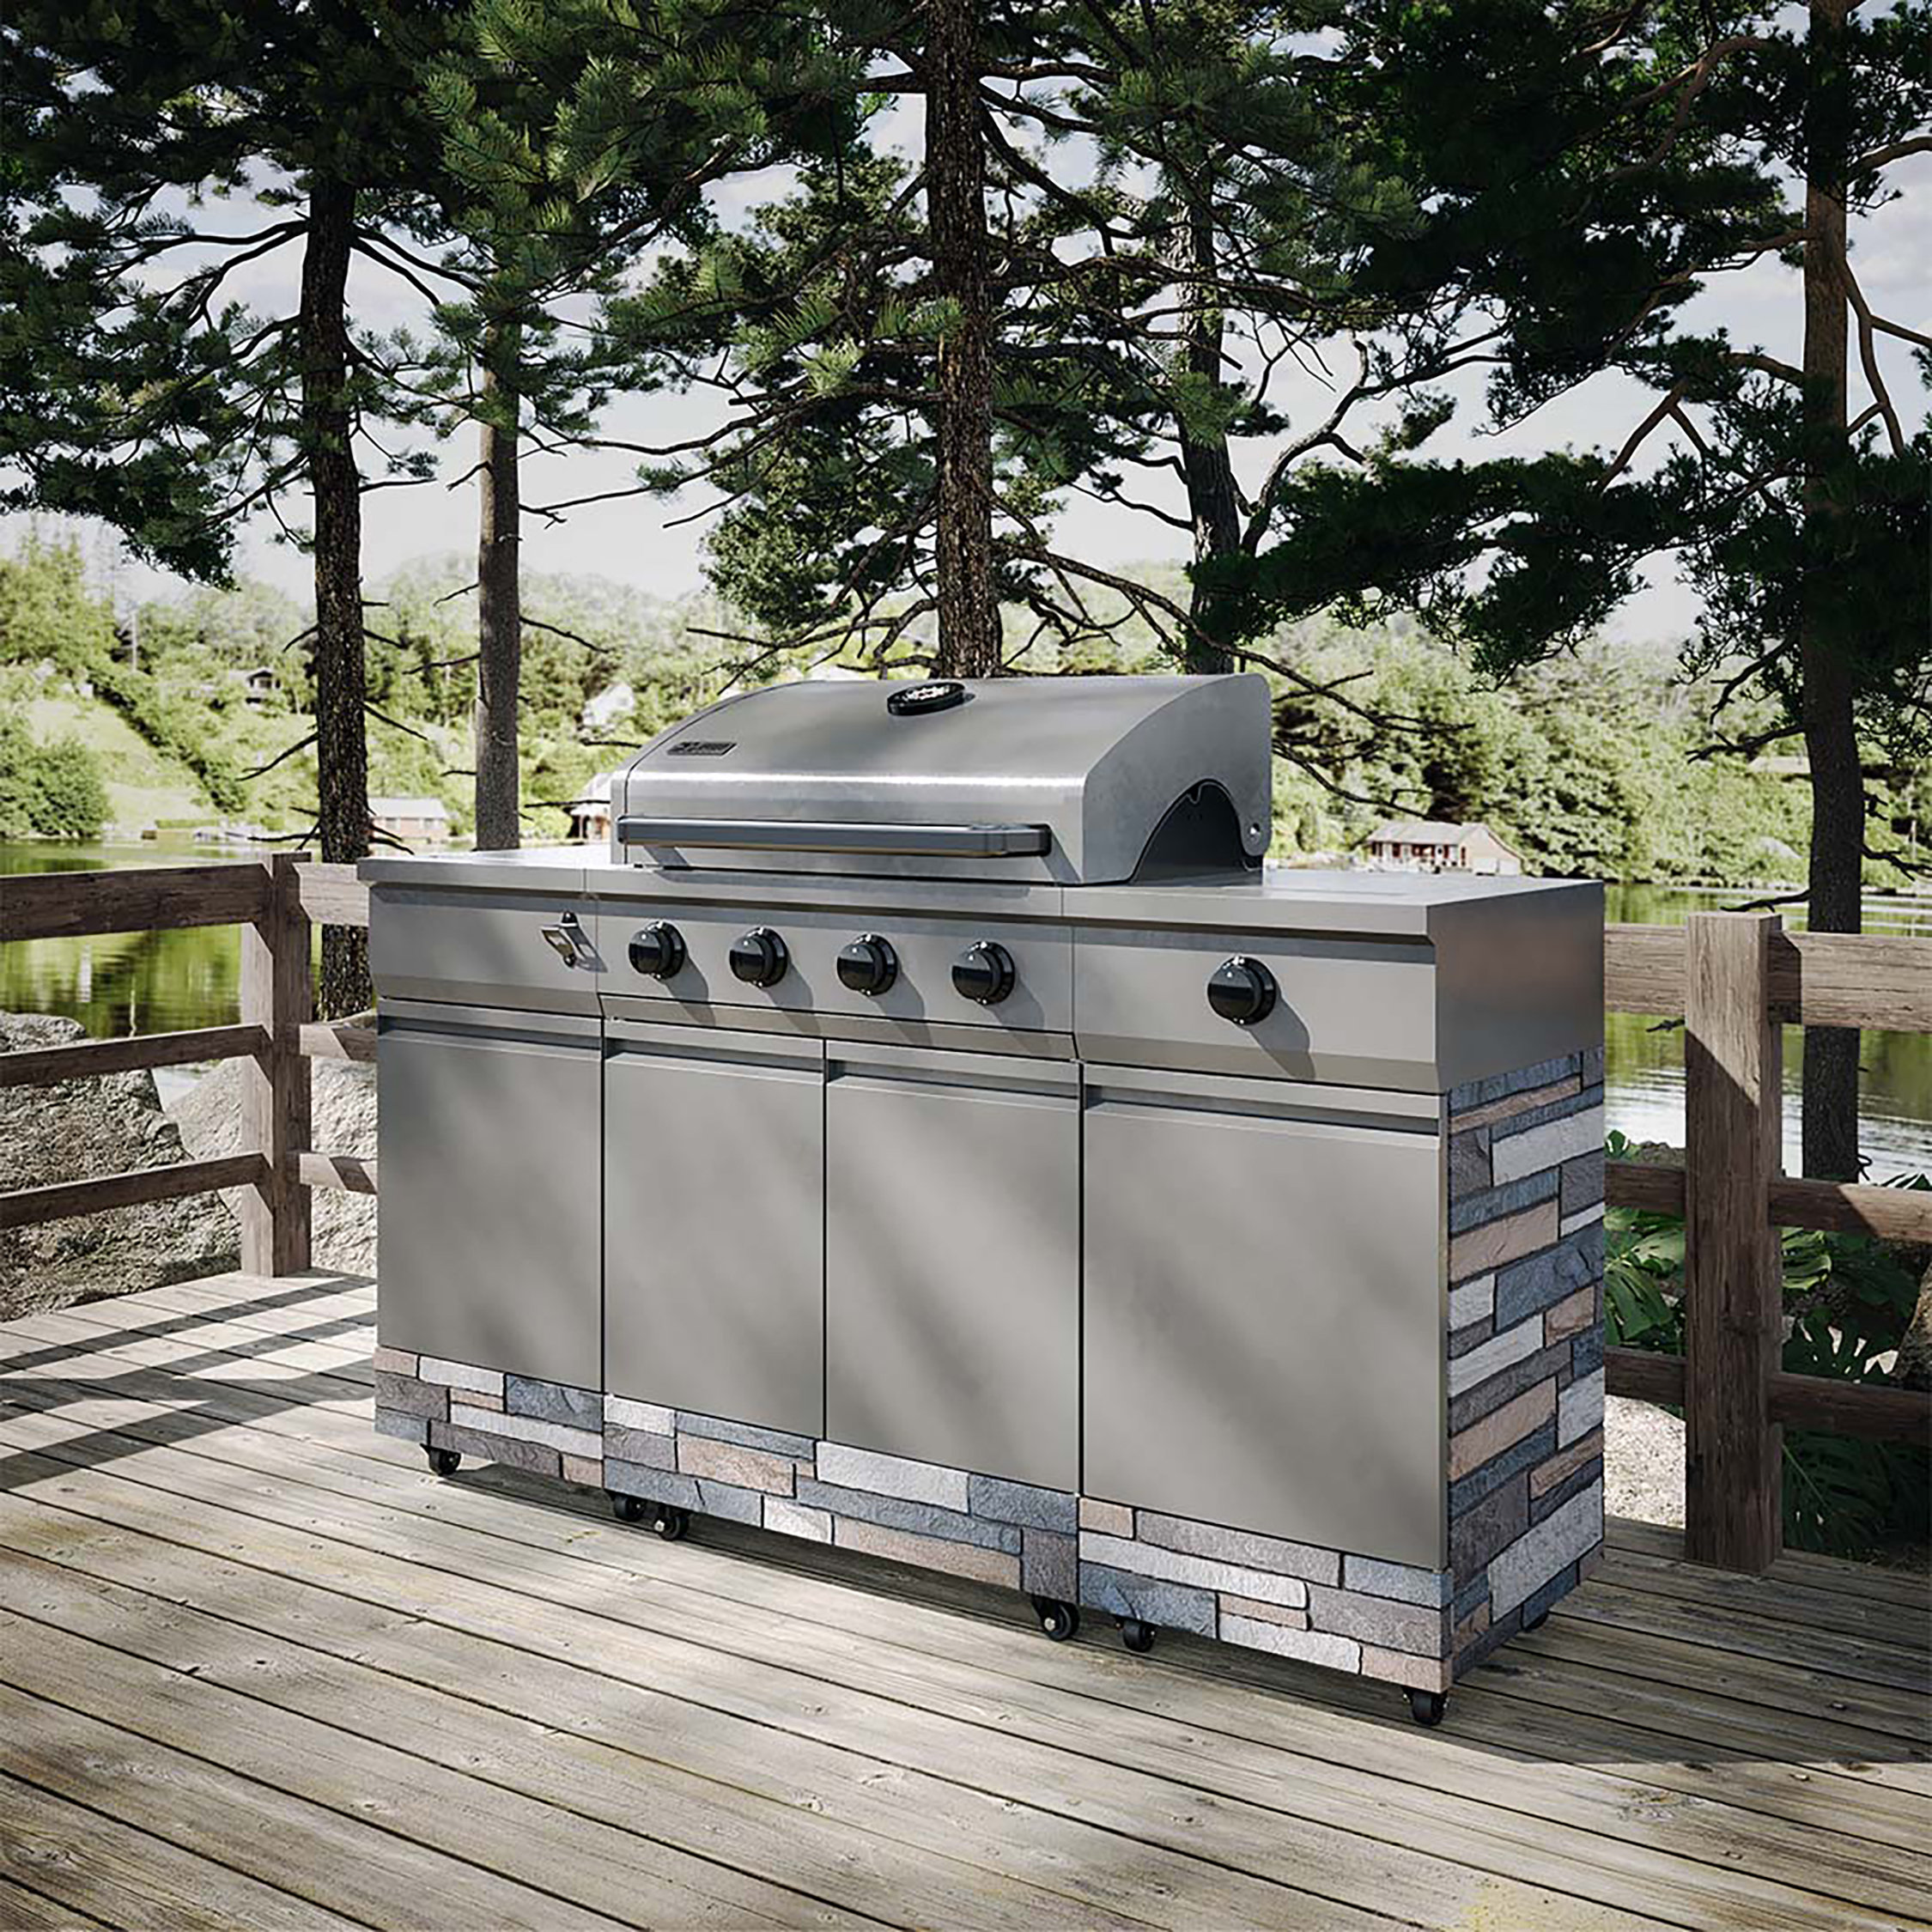 5 things I wish I knew before replacing my grill with a flat-top